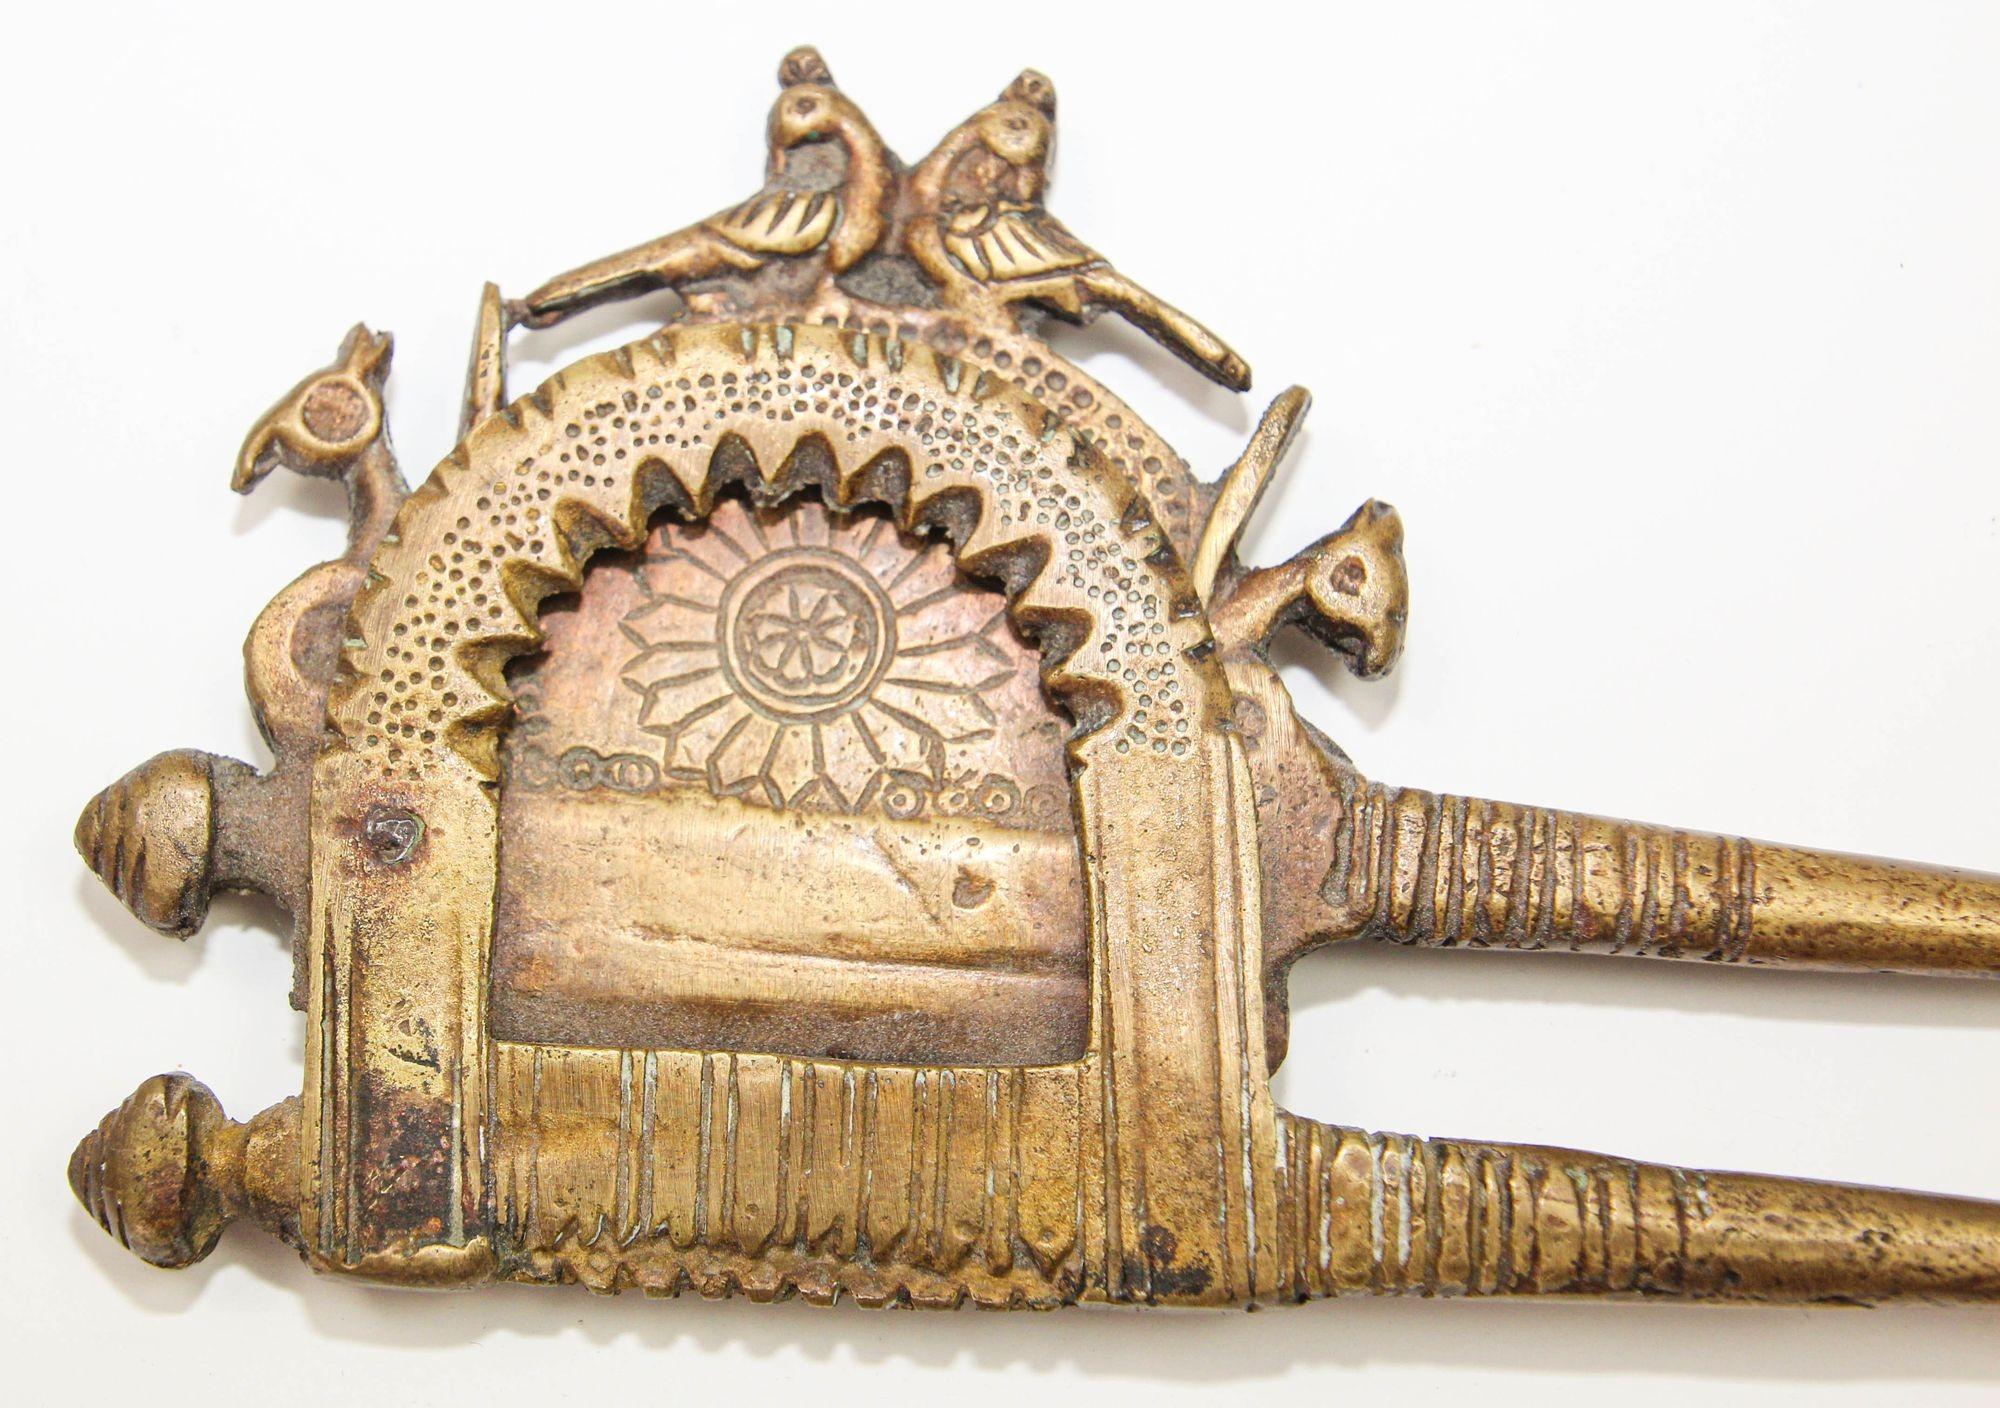 A late 19th or early 20th century Indian brass betel nut cutter from the North Western regions. 
This is a betel-nut cutter made of brass using casting technique with bird motifs and rosette.
It has a steel blade grafted into the body for strength